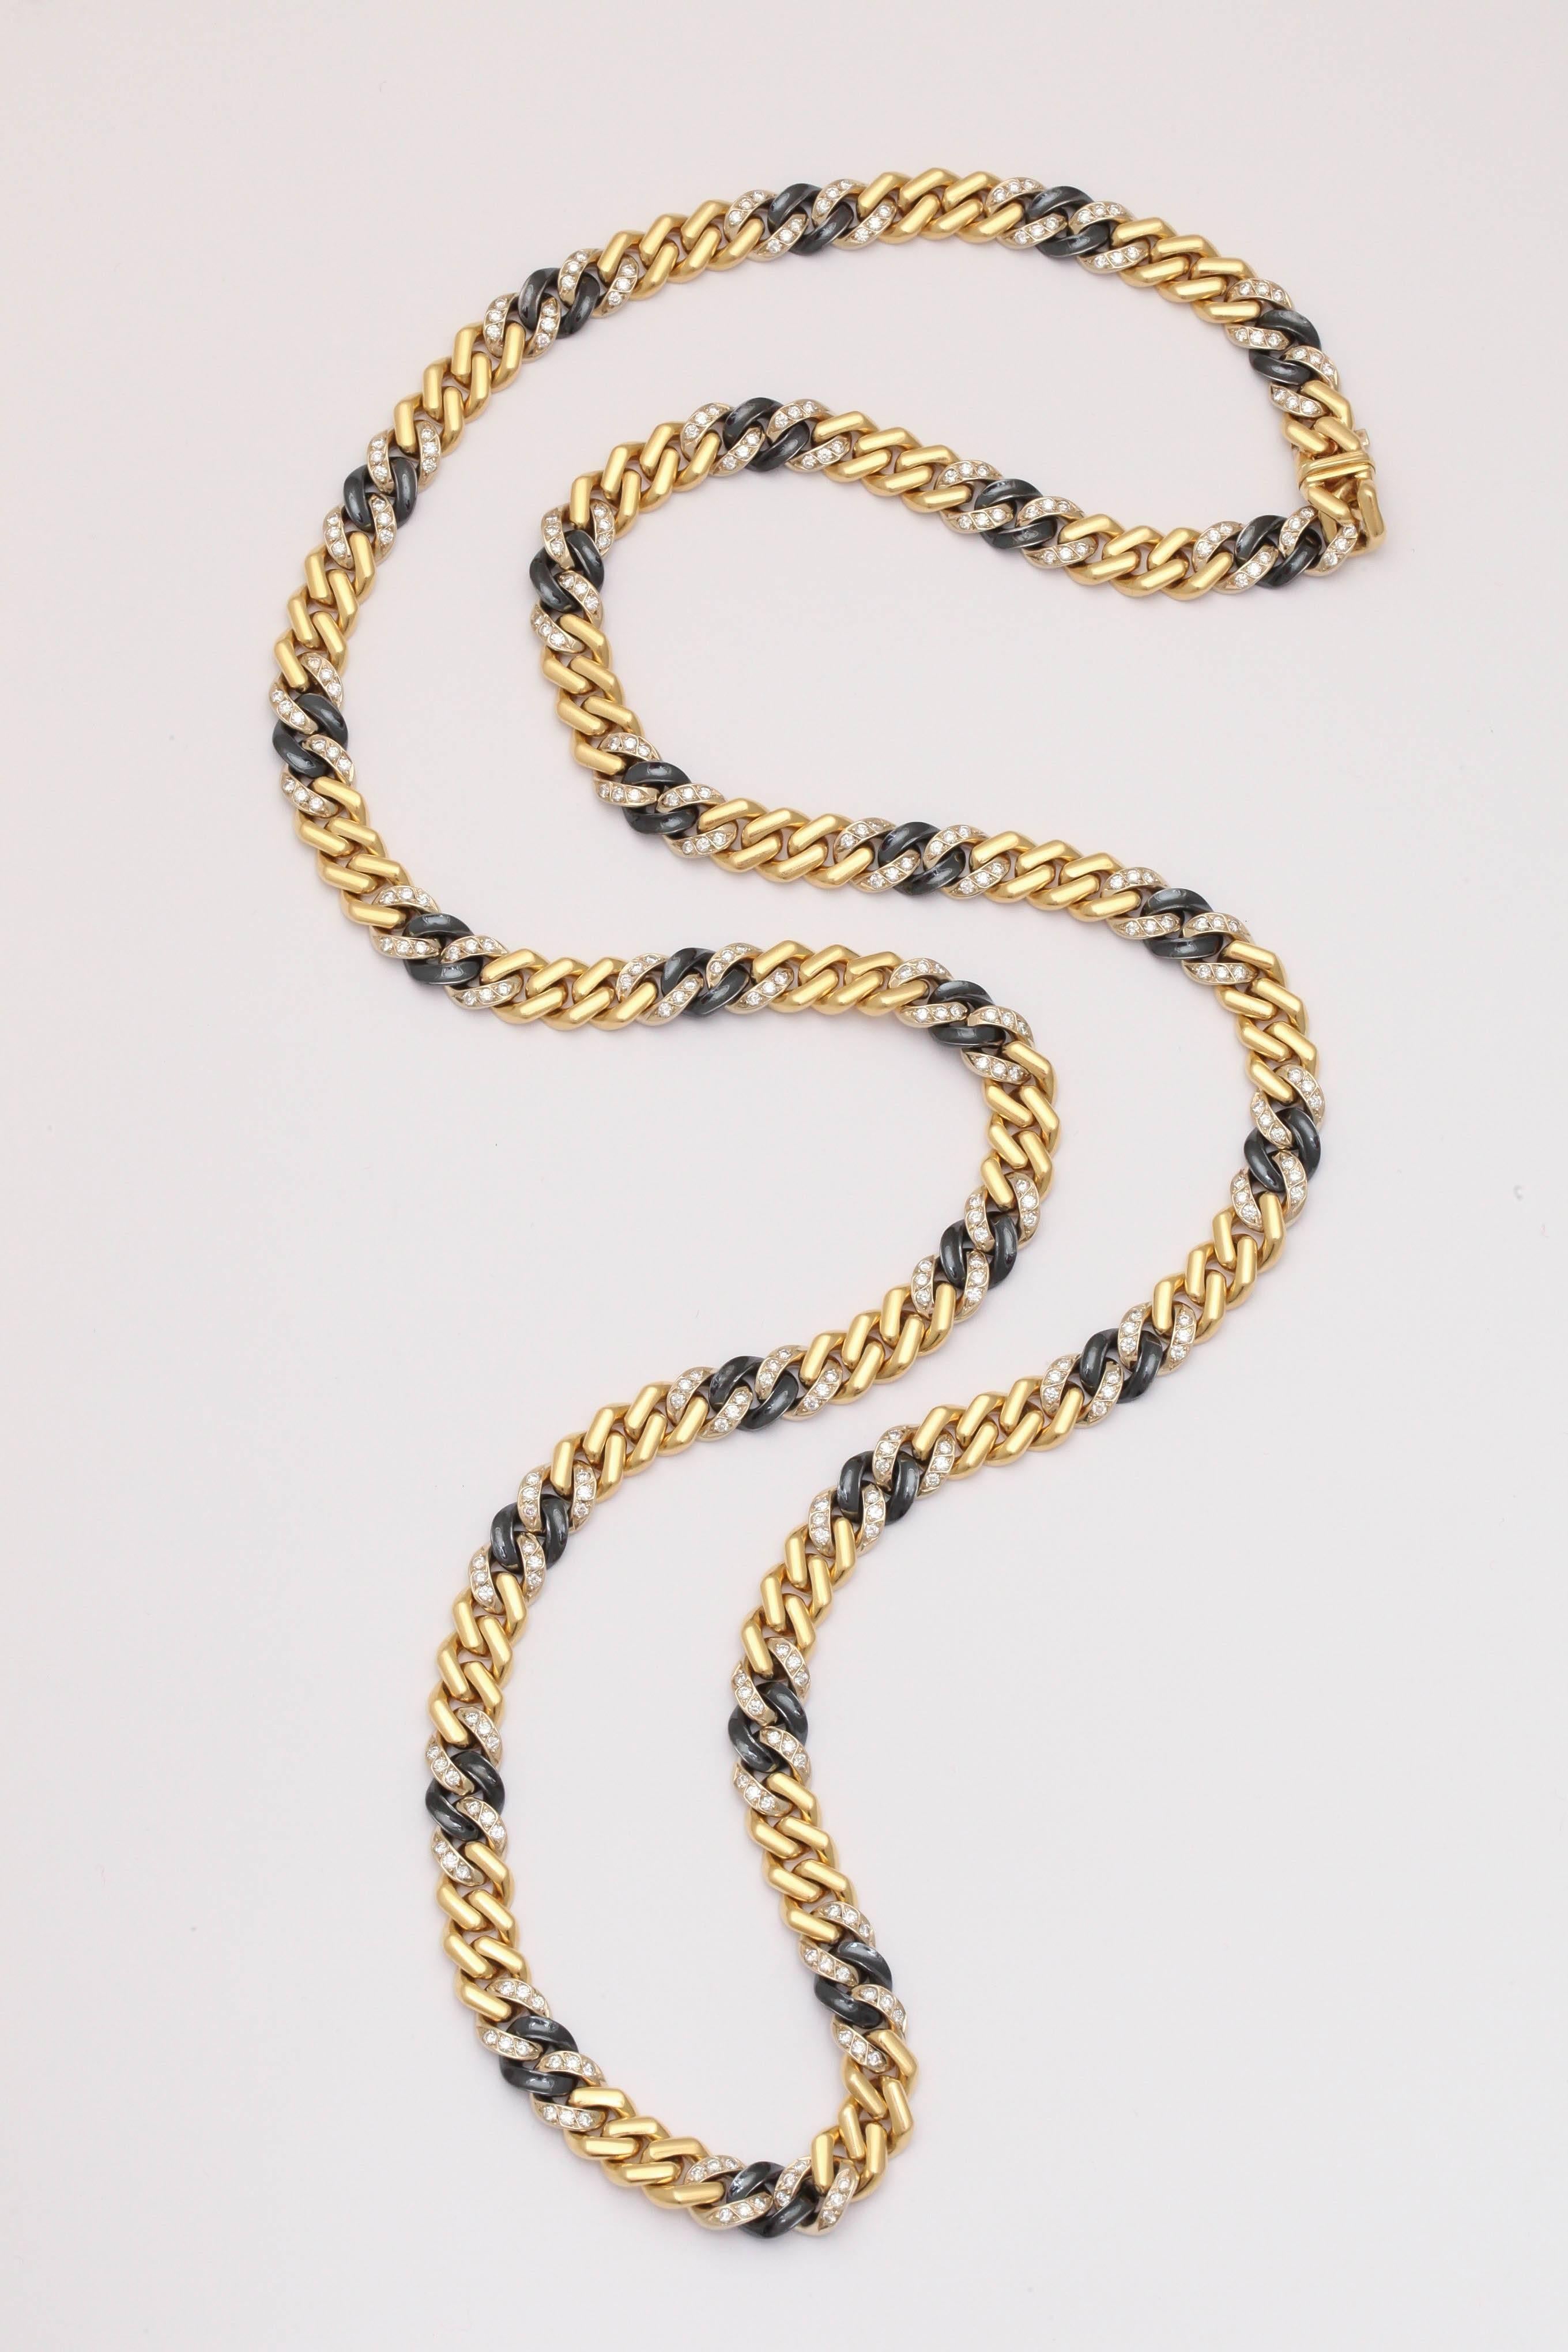 Chic, Chic, & even more Chic.  Bulgari 1960's 18kt chain with alternating Gold & Diamond links connected by a single gun metal link.  Total of 324 full cut - clean white Diamonds.  Approximately  9cts Total and a total of 32